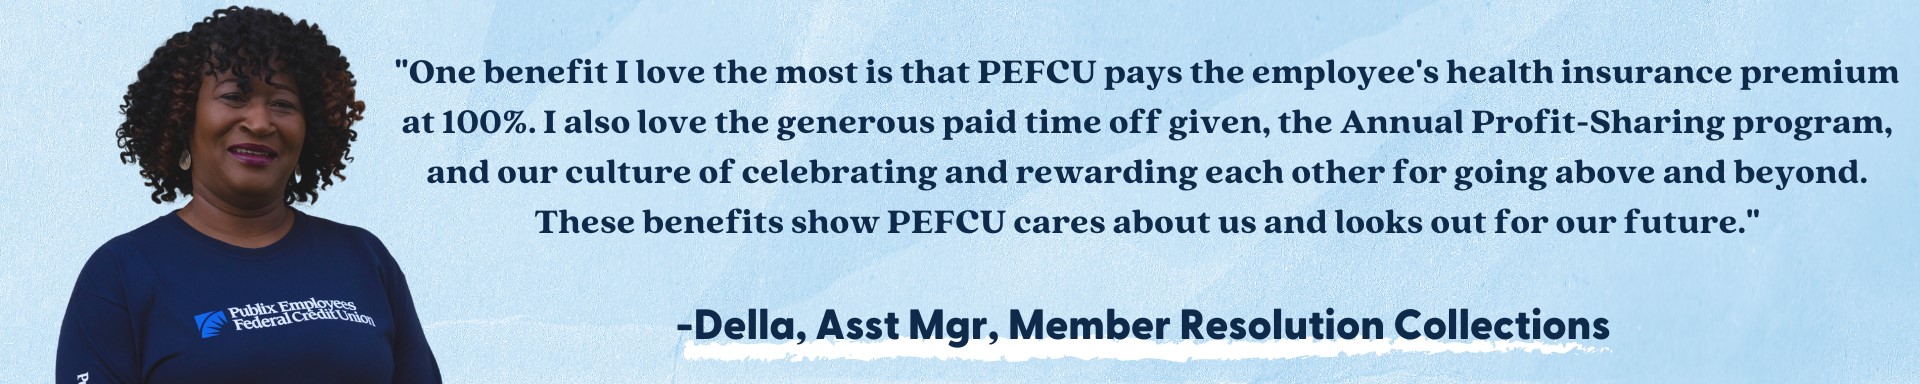 One benefit I love the most is that PEFCU pays the employee's health insurance premium at 100%